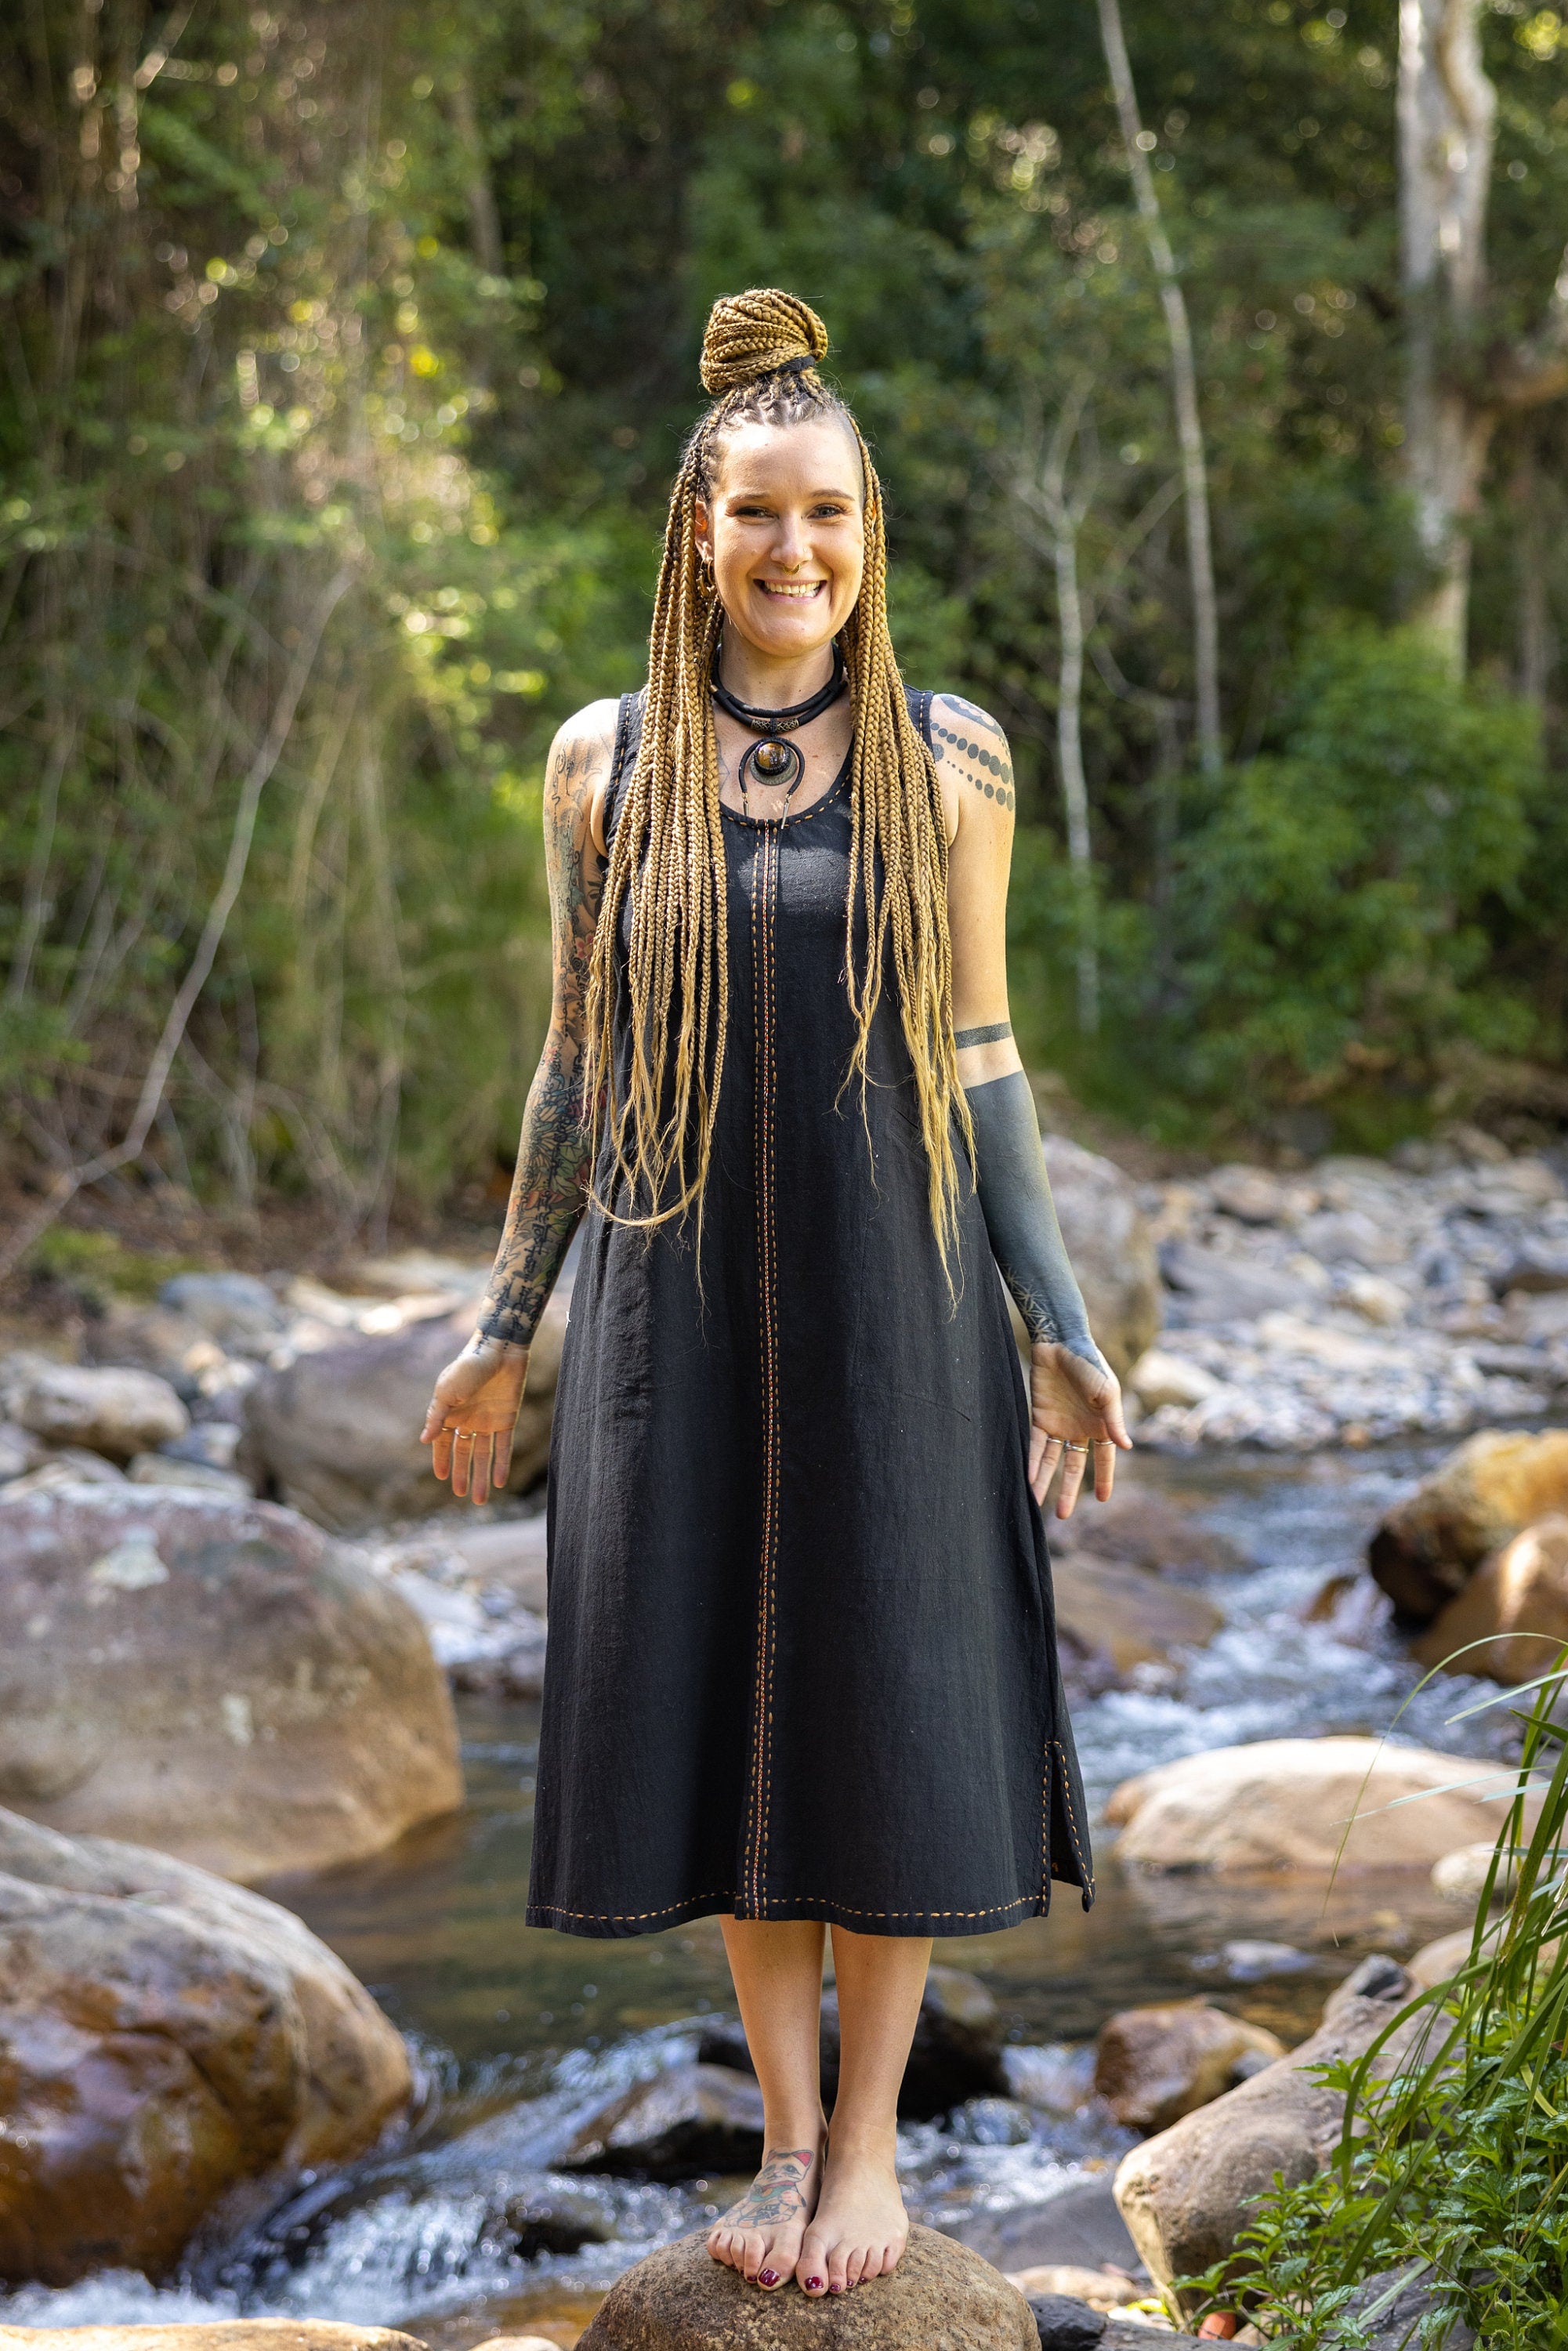 Our AHUA dress is a beautifully handmade piece made of 100% natural cotton. Its simple, free-flowing design is both comfortable and stylish. 
Featuring two convenient pockets and is decorated with intricate hand-woven embroidery.